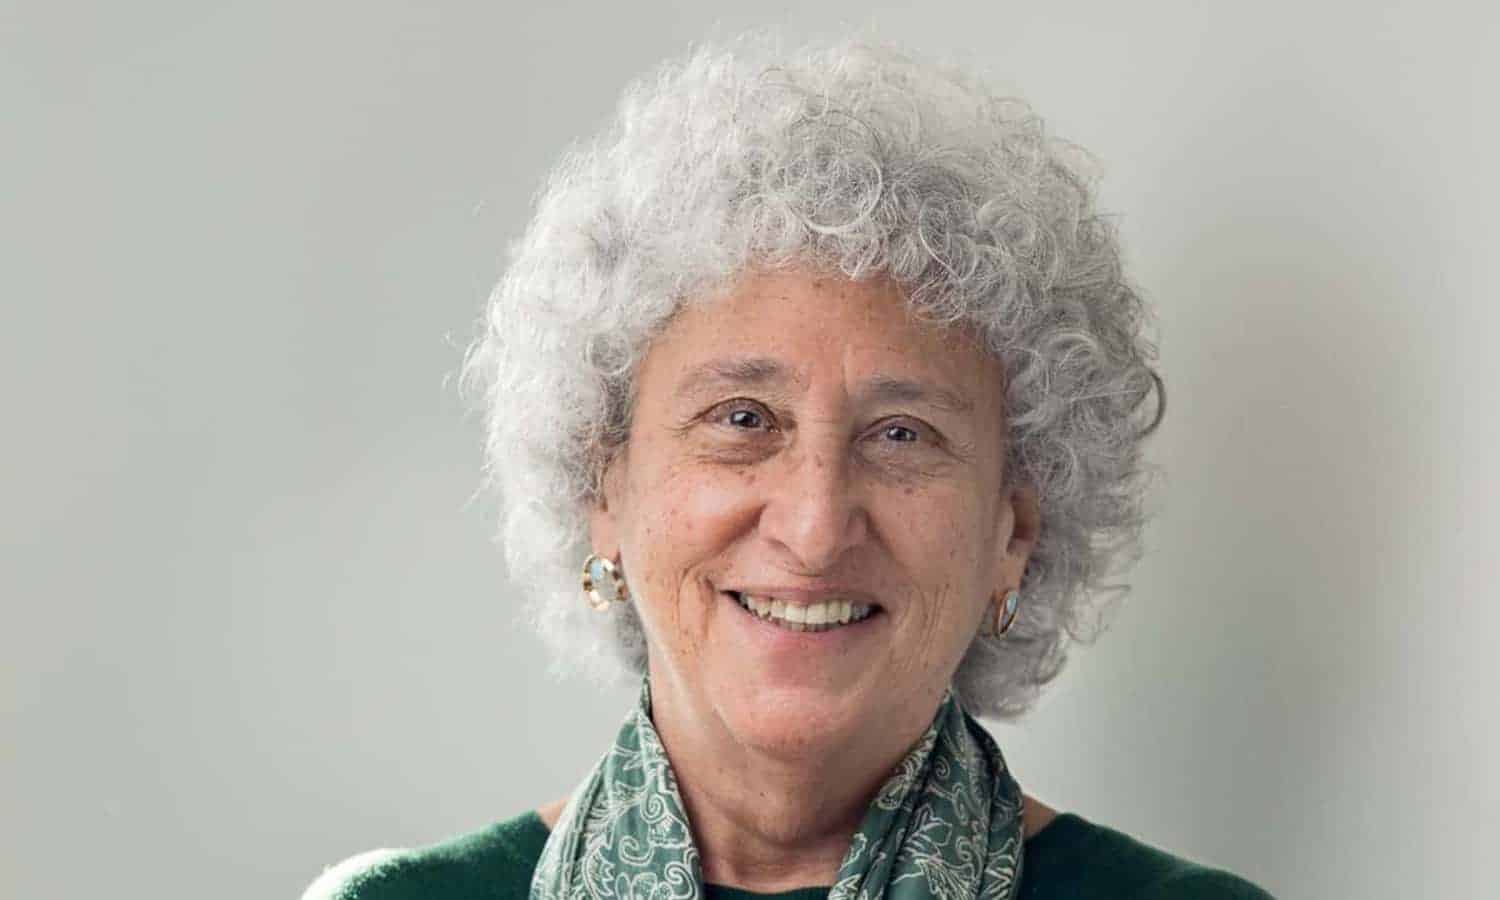 On Food Talk, Marion Nestle joins Danielle Nierenberg at the Second Annual NYC Summit on Food Waste and Food Loss to talk about why we waste.